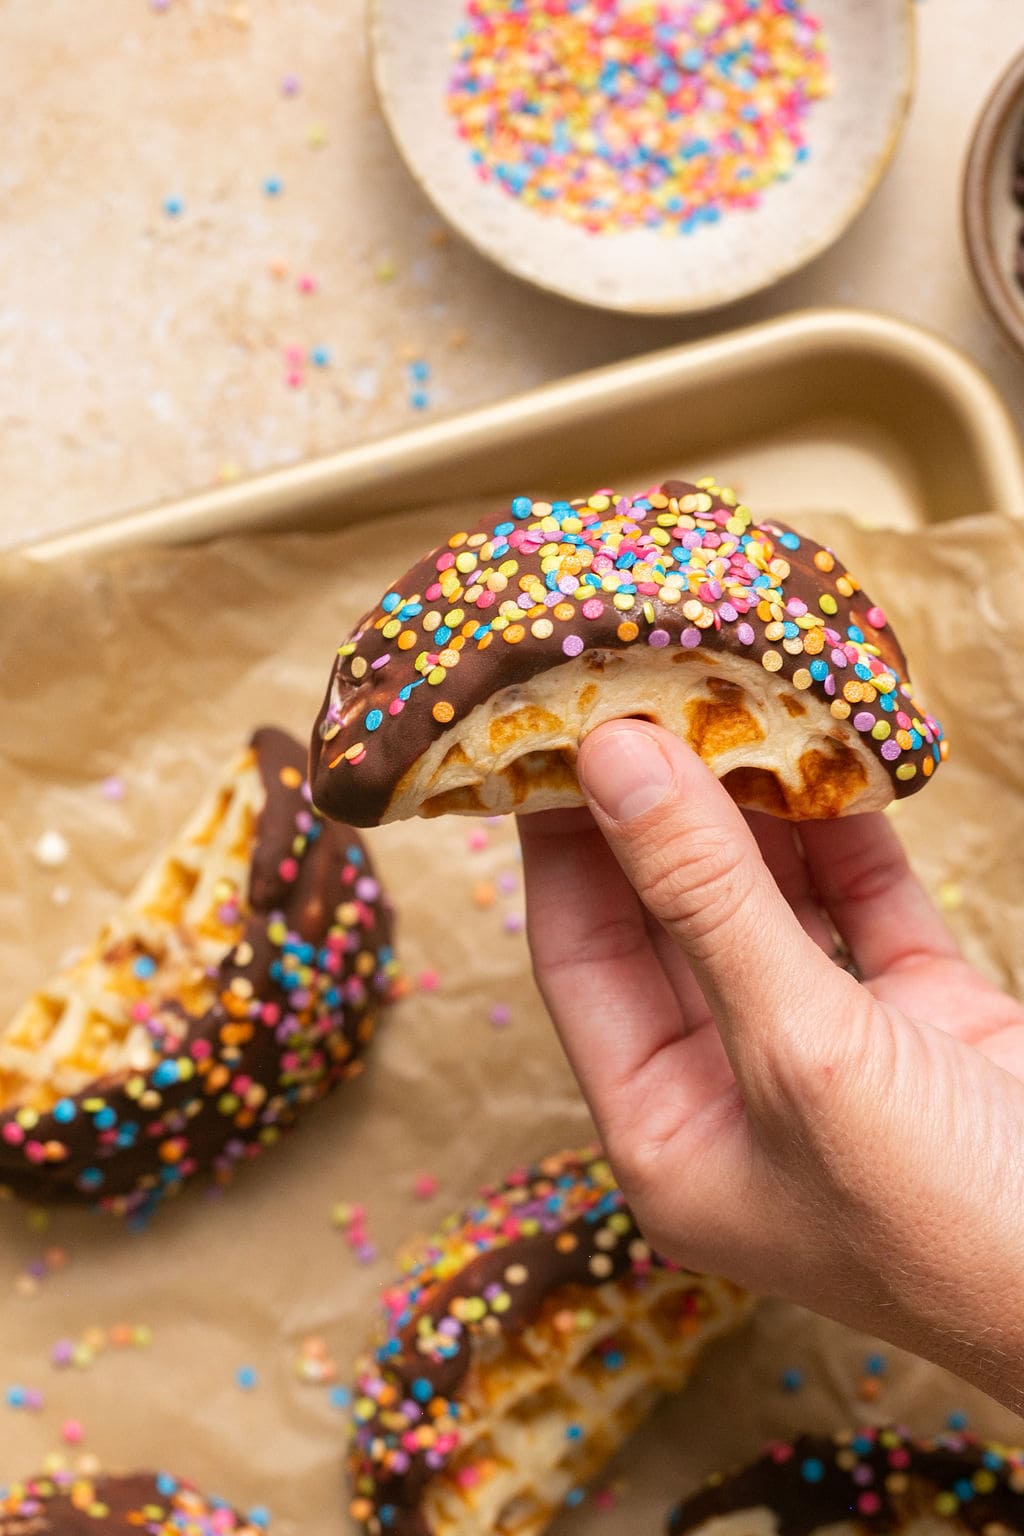 Person holding a homemade Choco taco topped with colorful sprinkles.